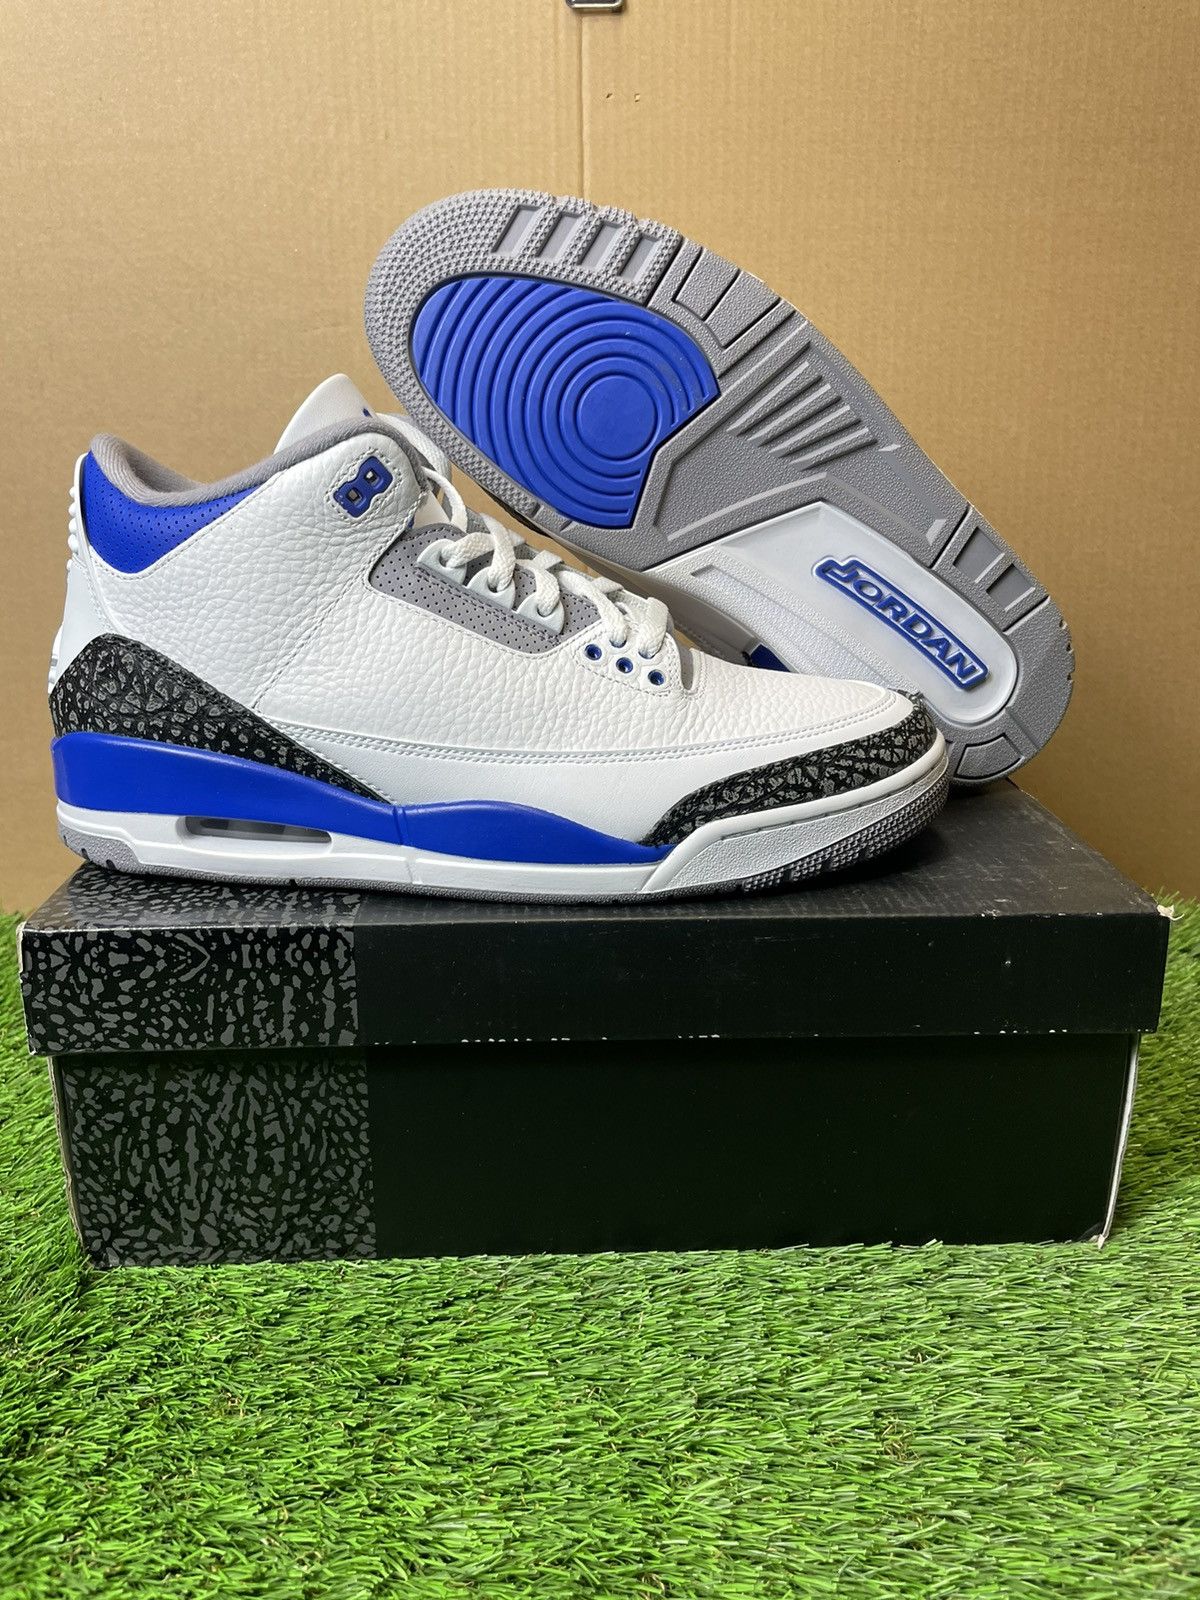 Pre-owned Jordan Brand 3 Racer Blue Size 12 New Shoes In White